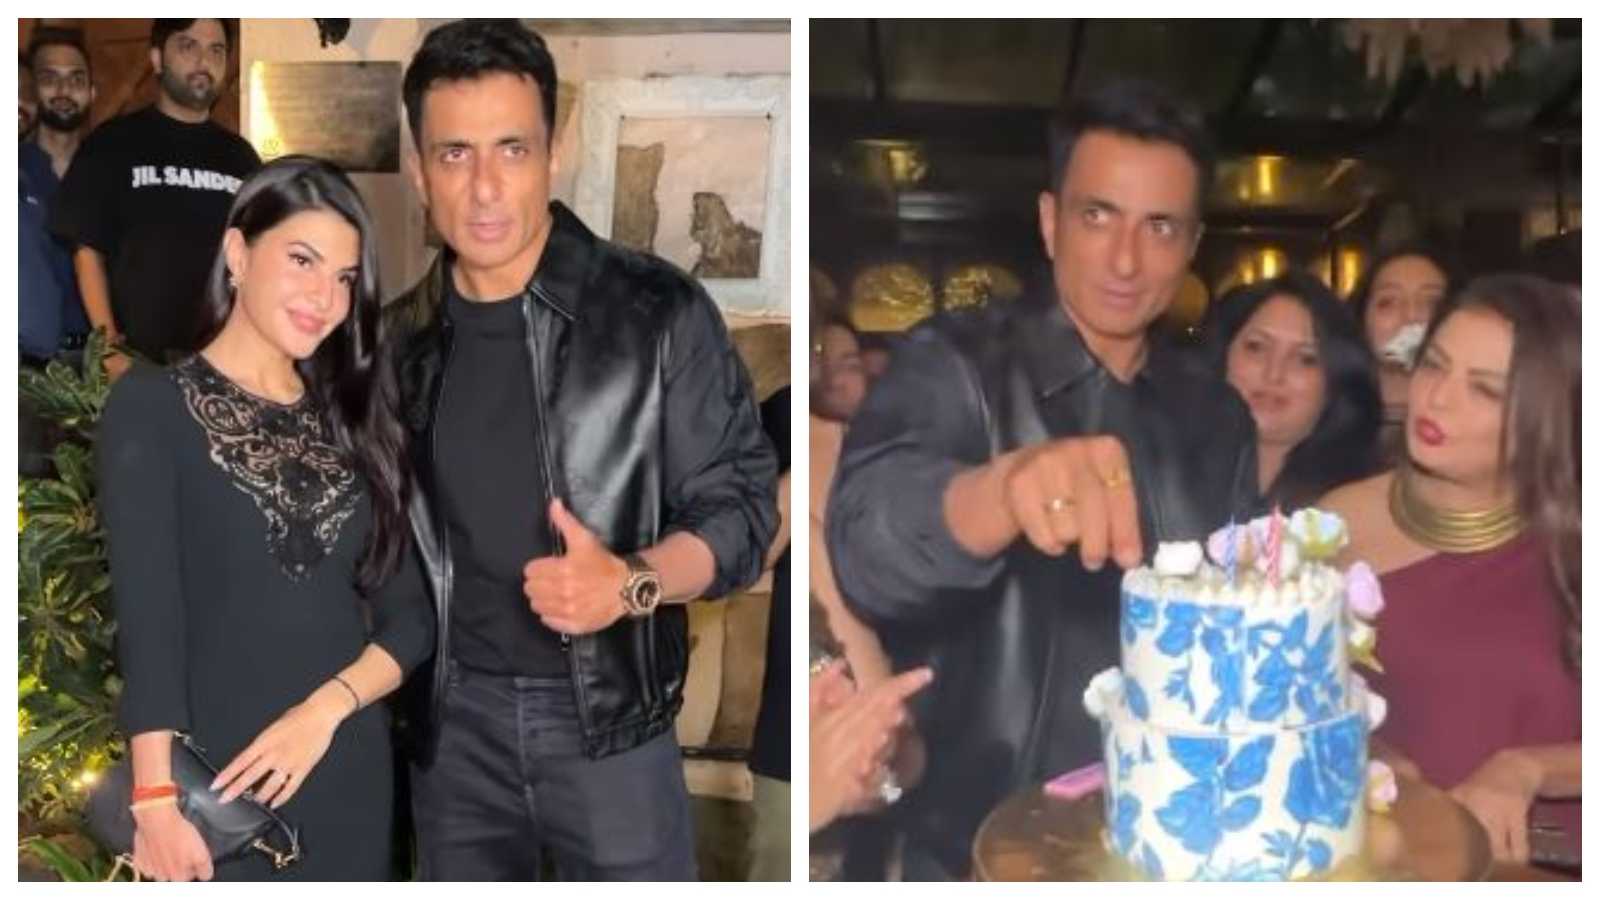 Jacqueline Fernandez stuns in black at Fateh co-star Sonu Sood's birthday bash, Prince Narula and others also attend